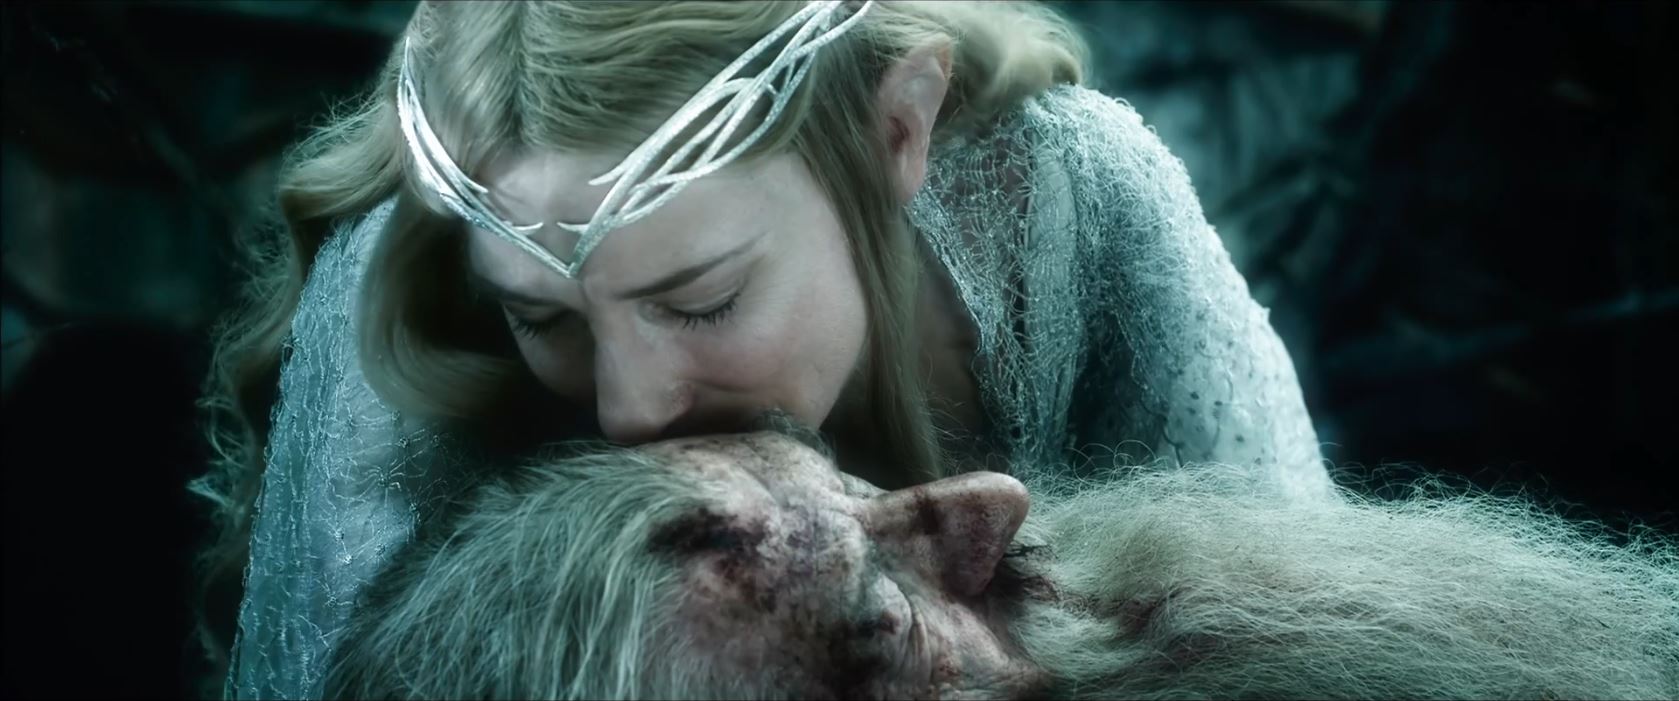 The Hobbit The Battle Of The Five Armies Trailer Cate Blanchett As Galadriel Kissing Gandalf